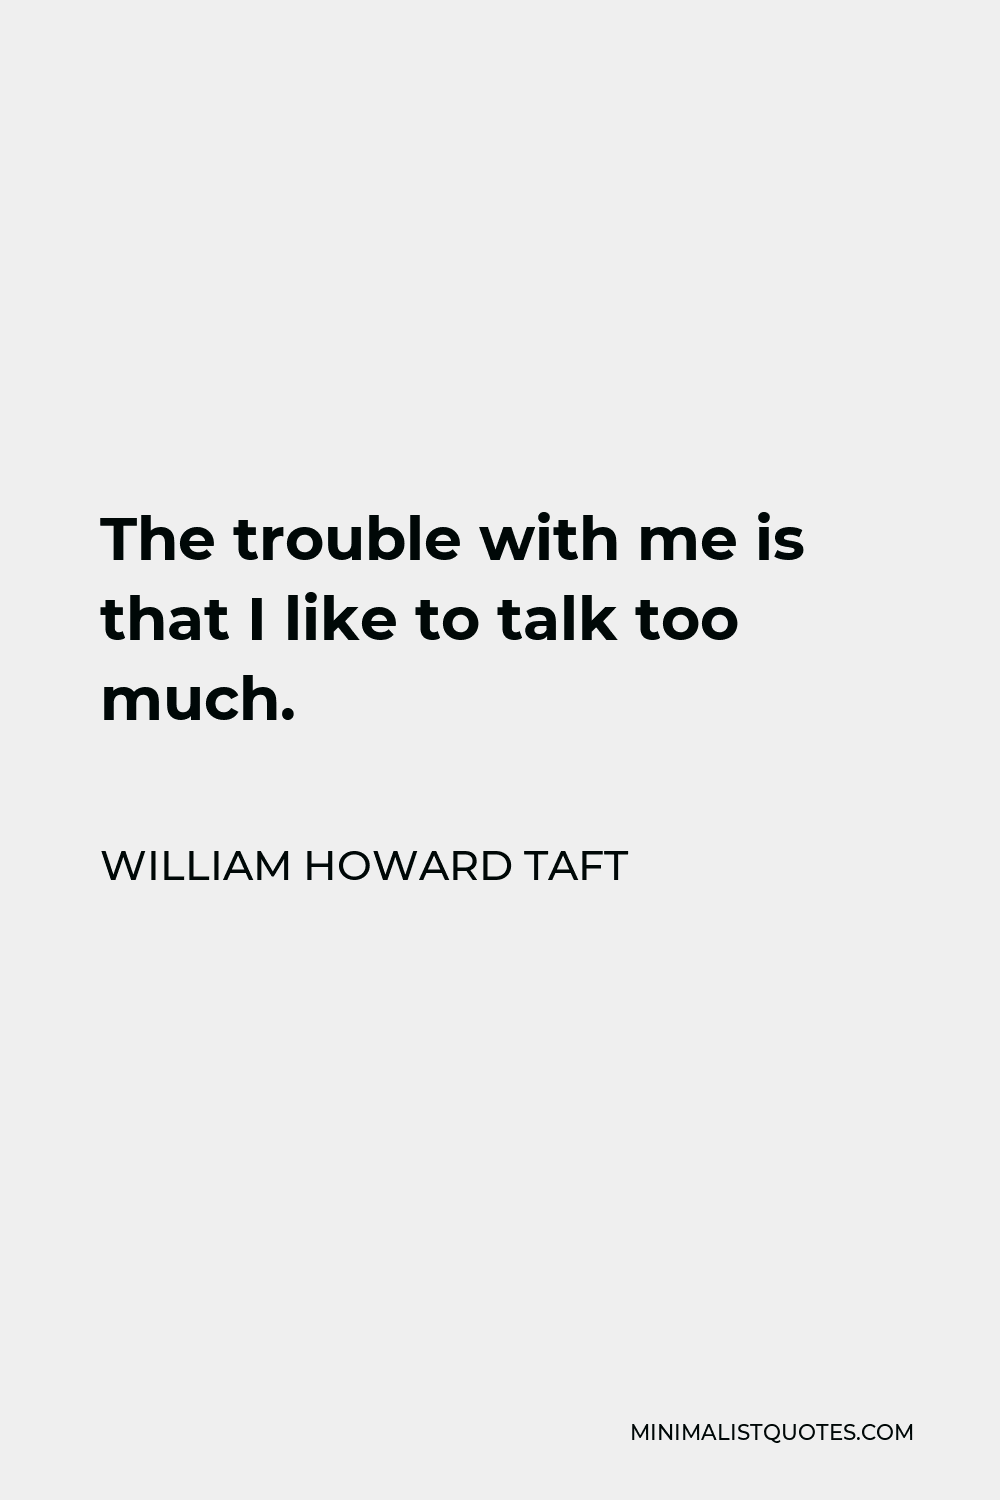 William Howard Taft Quote - The trouble with me is that I like to talk too much.